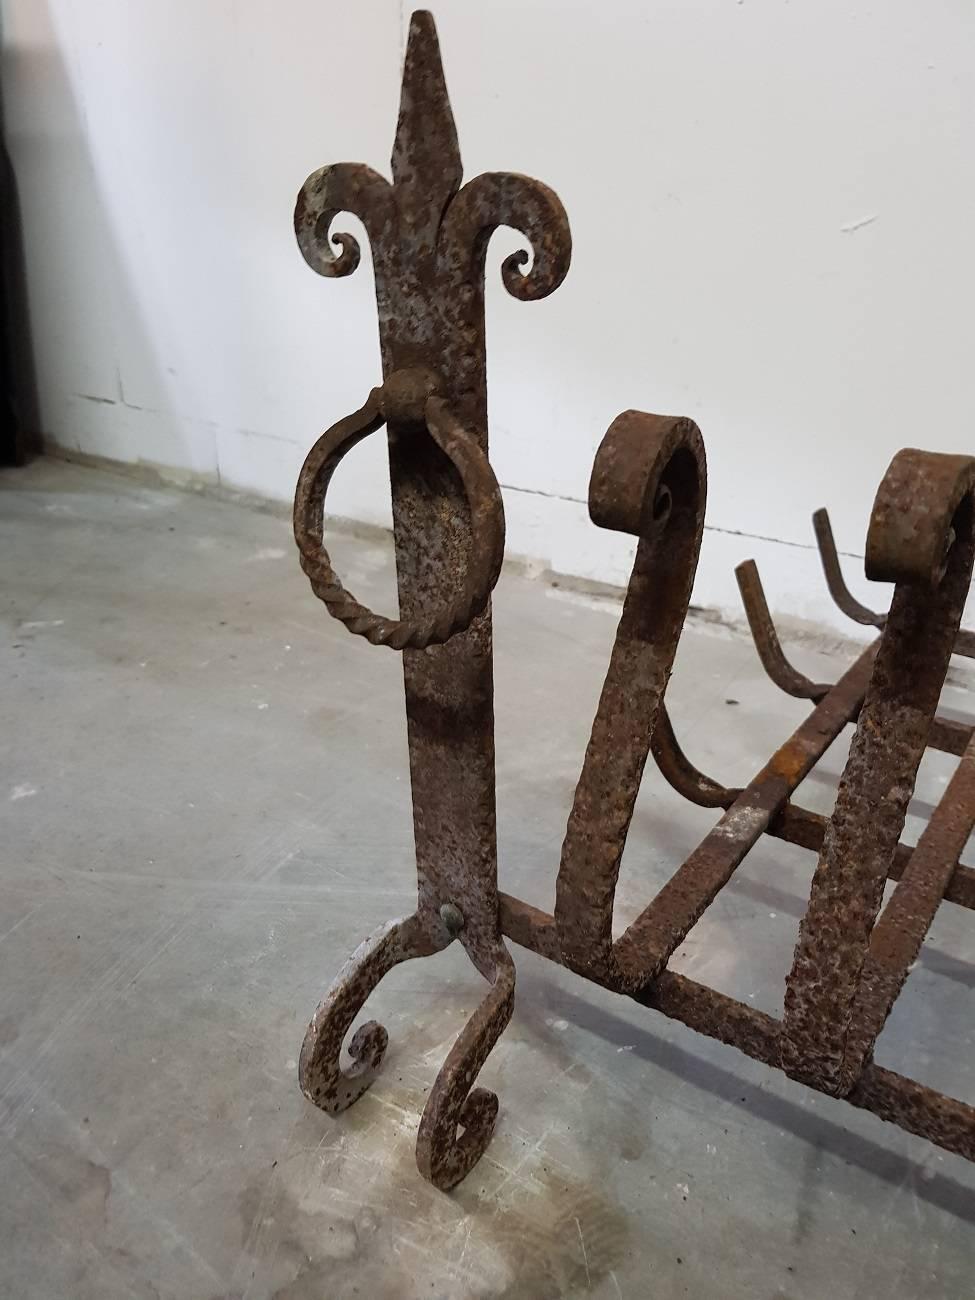 French vintage wrought iron fireplace grate/basket with ornaments in the shape of the French Lily, it's made, circa 1960-1970 and has some rust all around but not damaged or cracked.

The measurements are:
Depth 66 cm/ 25.9 inch.
Width 83 cm/